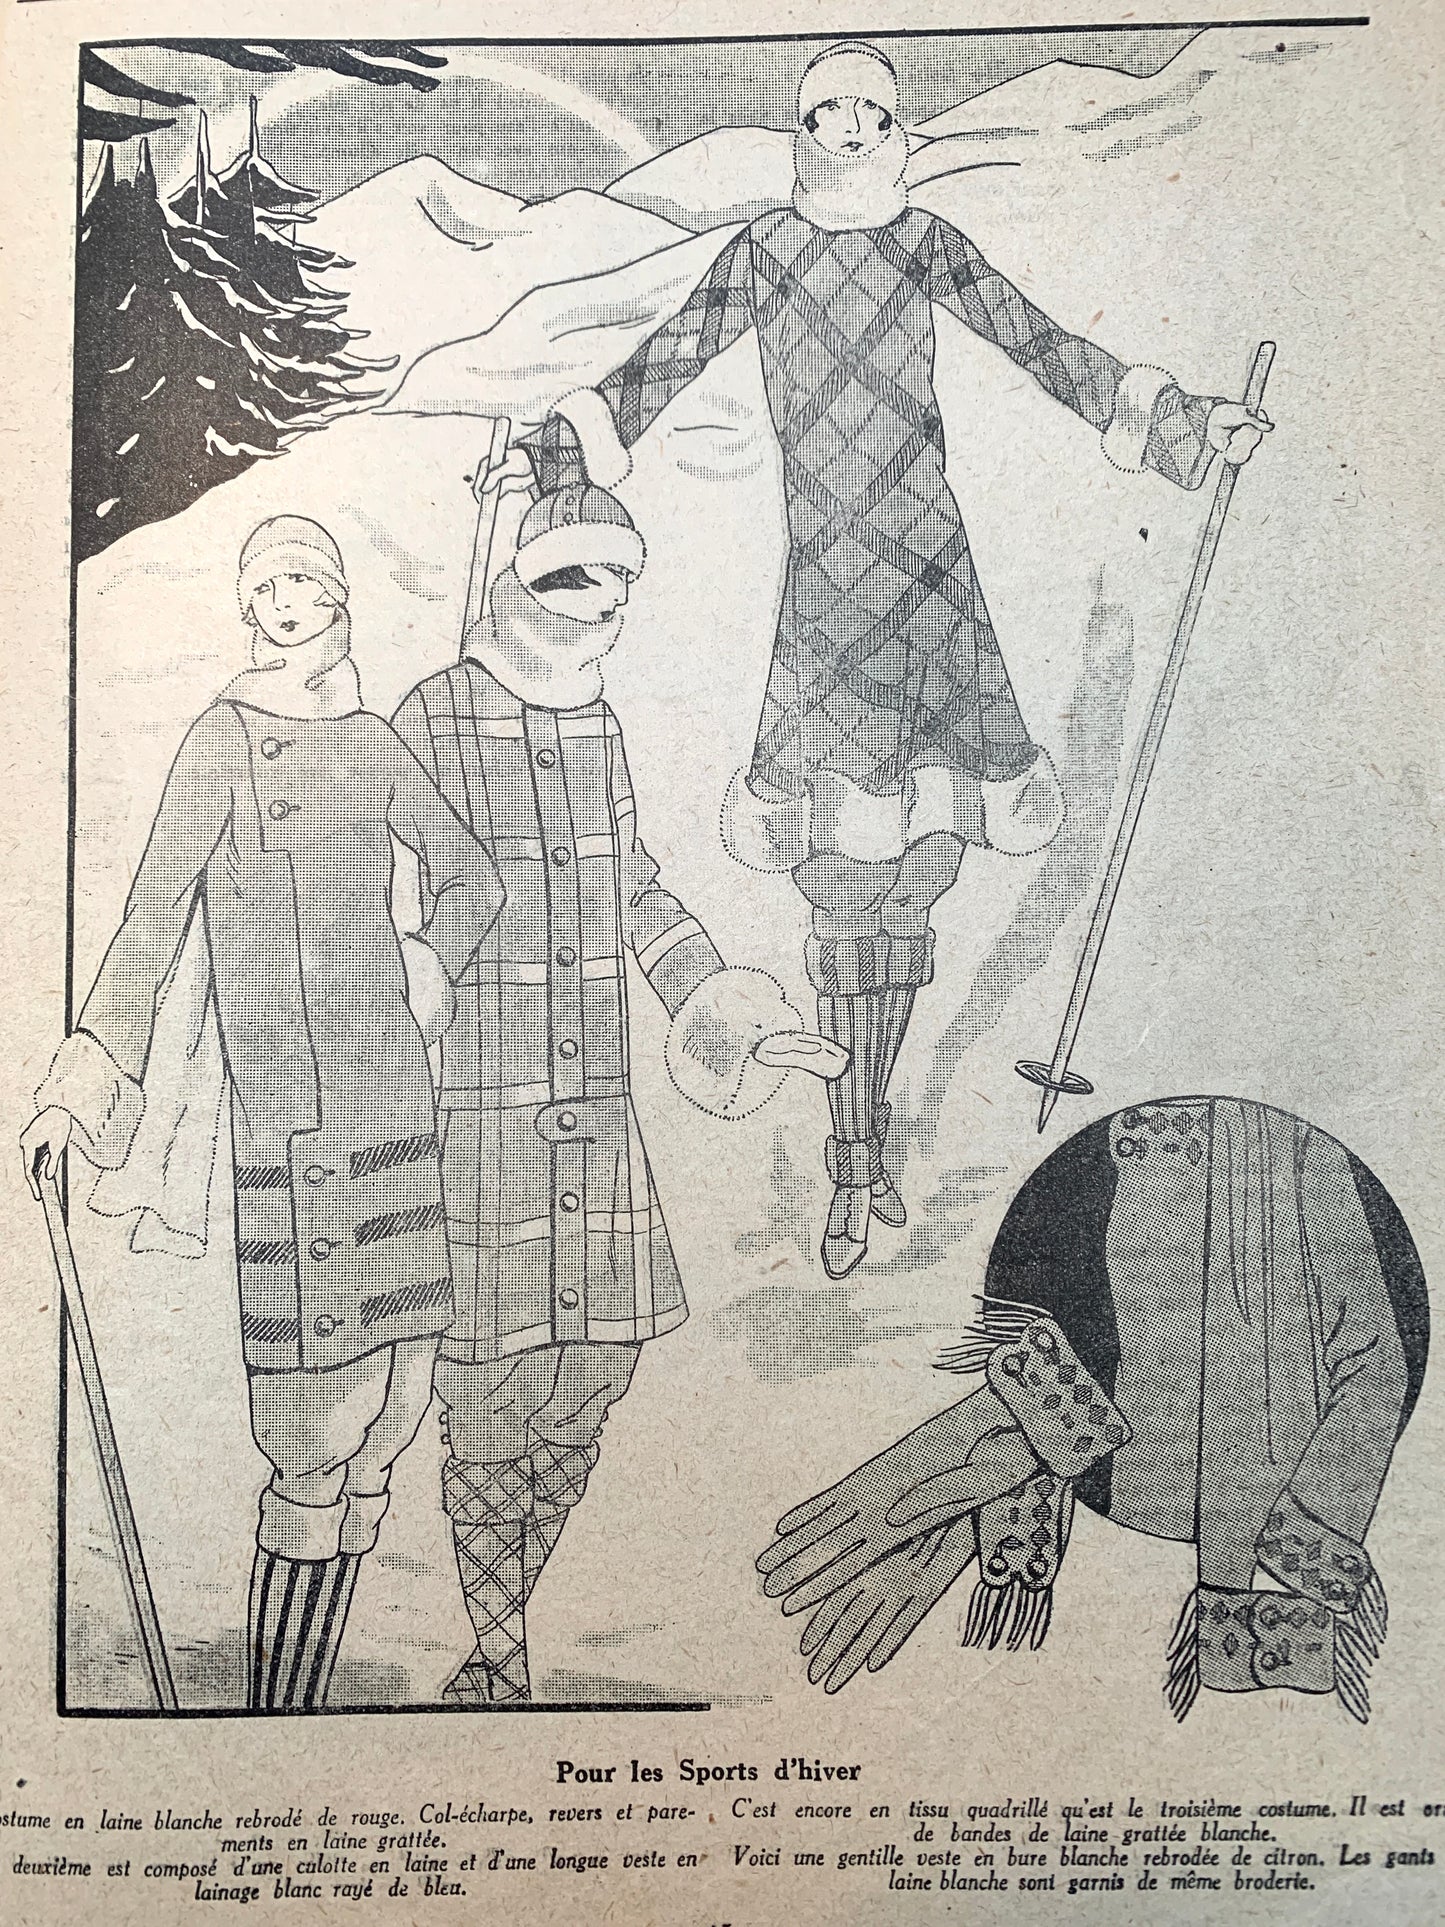 1920s Fancy Dress Costumes and Ski Wear in February 1926 French Review "La Femme Chez Elle"